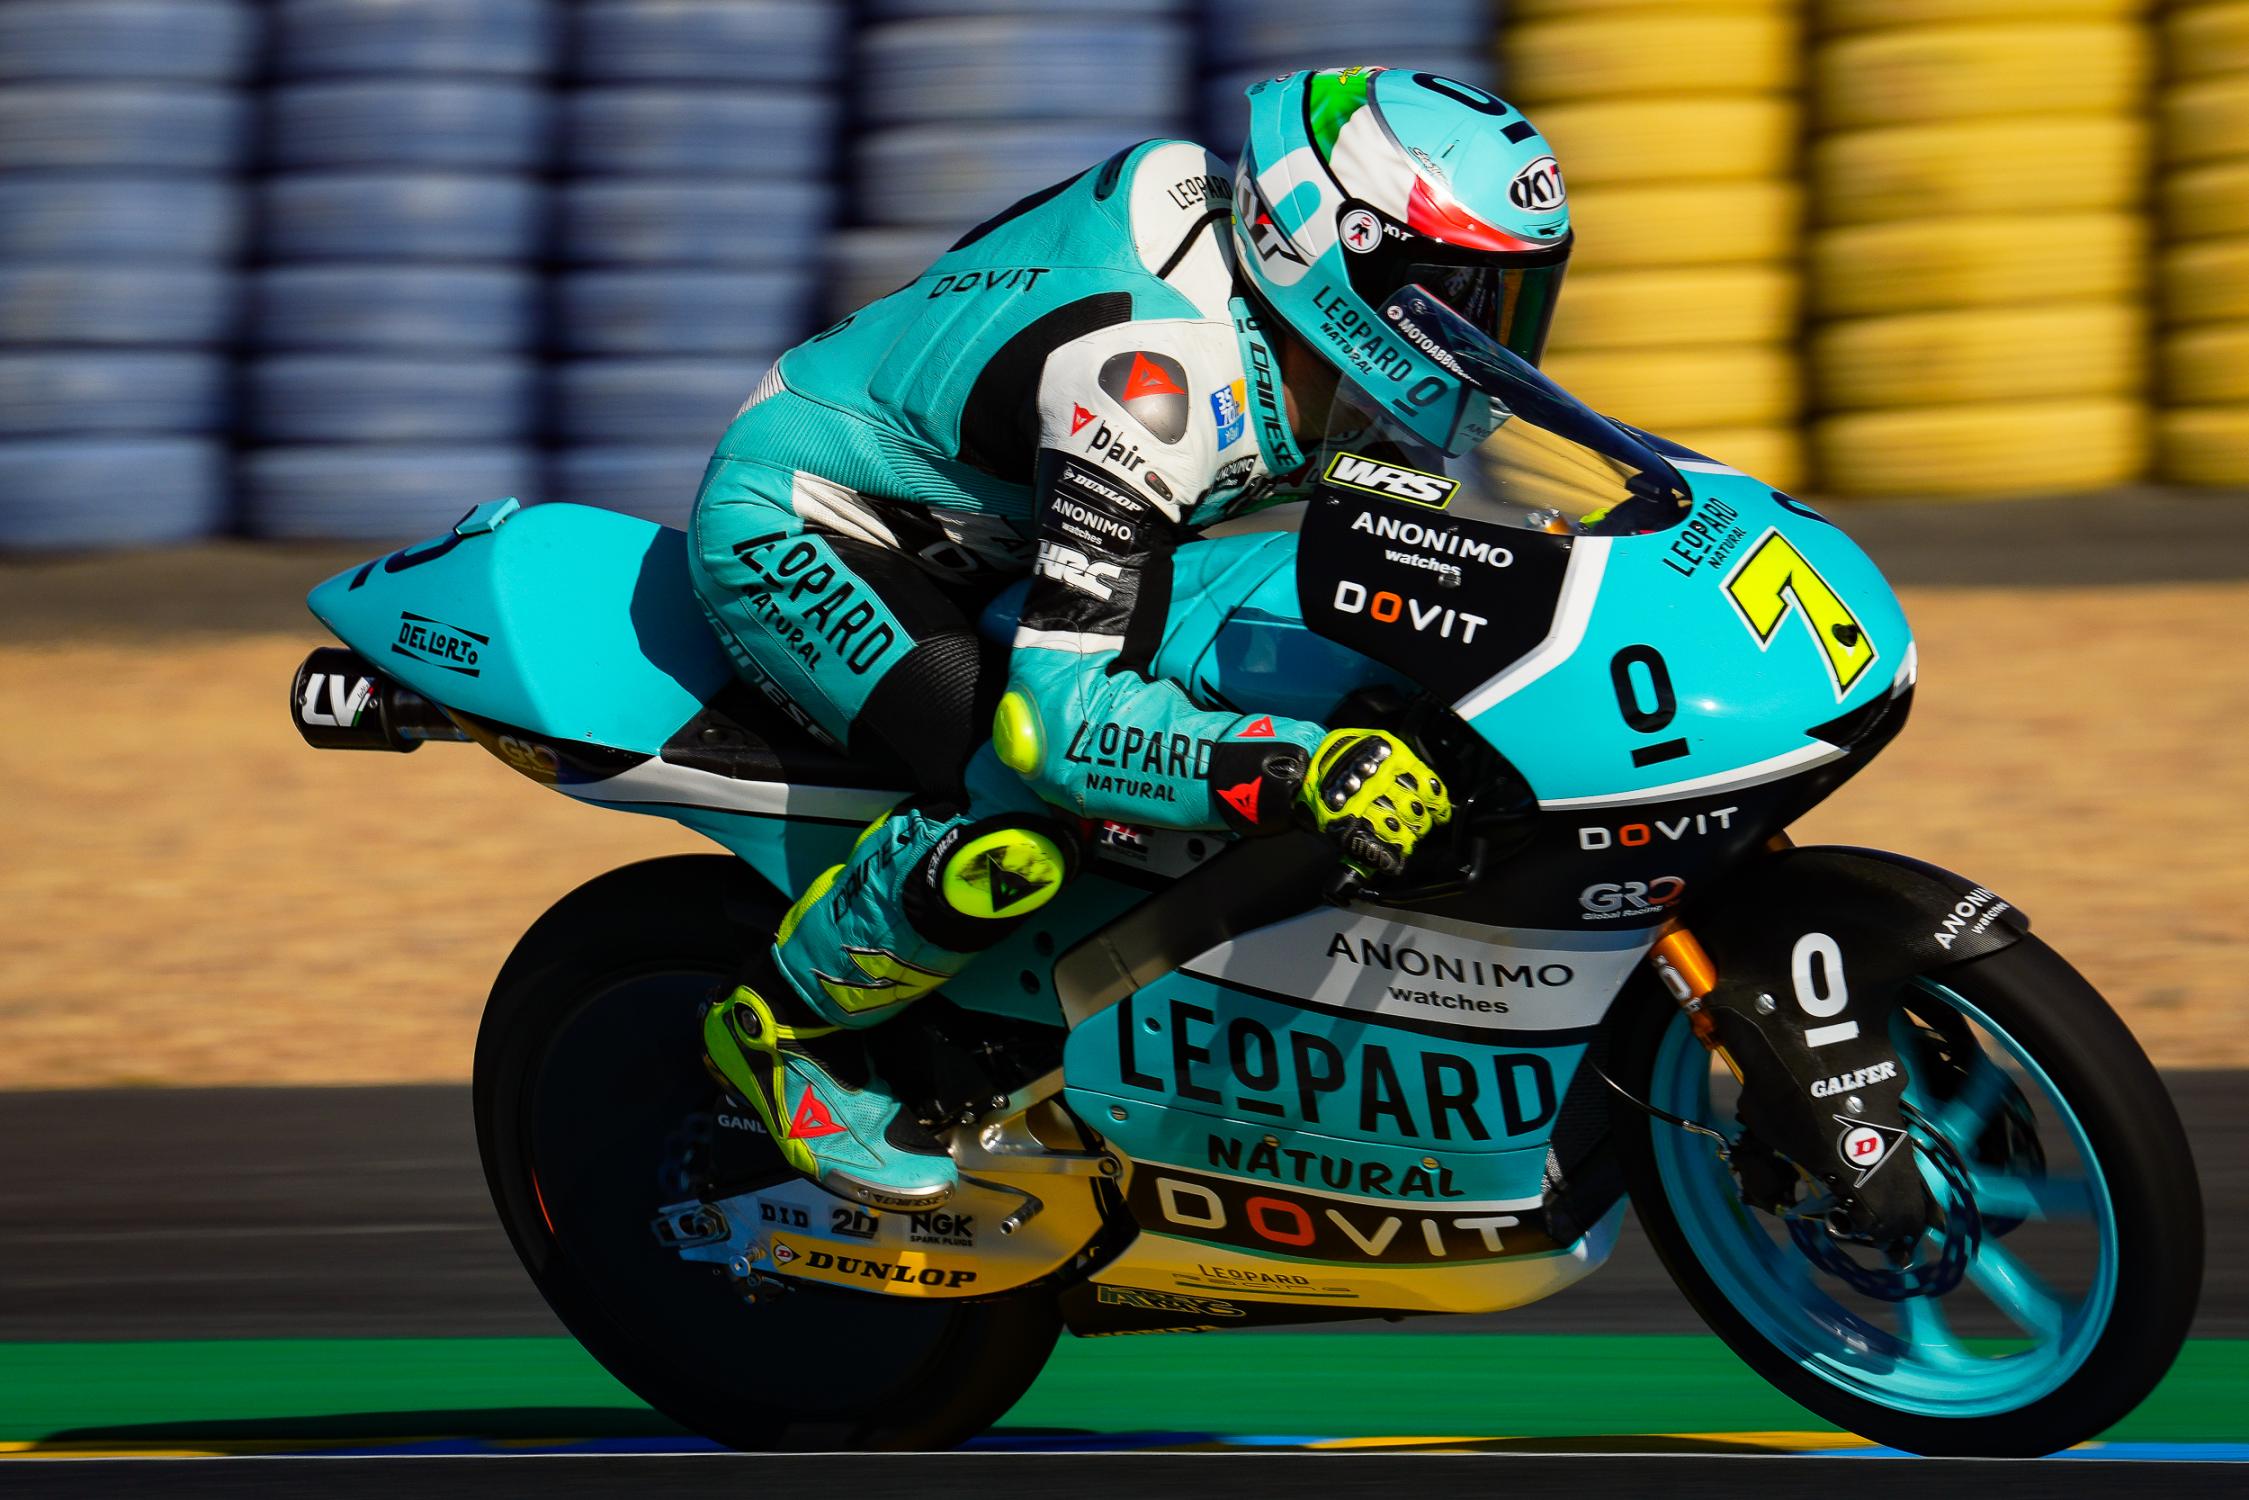 Moto3 France Le Mans FP3: The pass of three for Dennis Foggia who seems untouchable